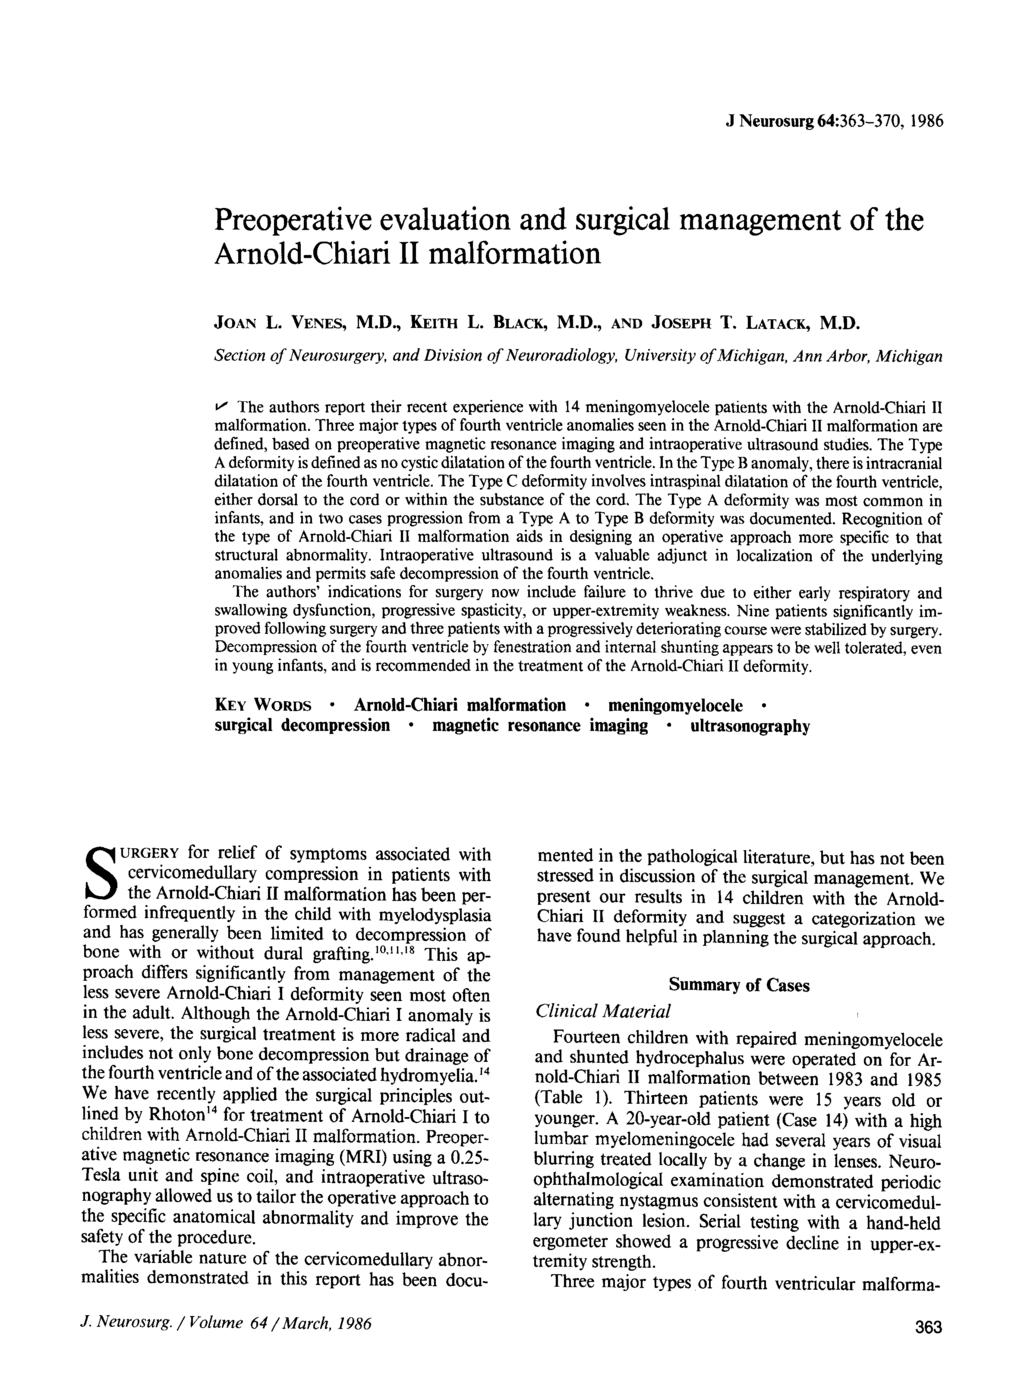 J Neurosurg 64:363-370, 1986 Preoperative evaluation and surgical management of the Arnold-Chiari II malformation JOAN L. VENES, M.D.